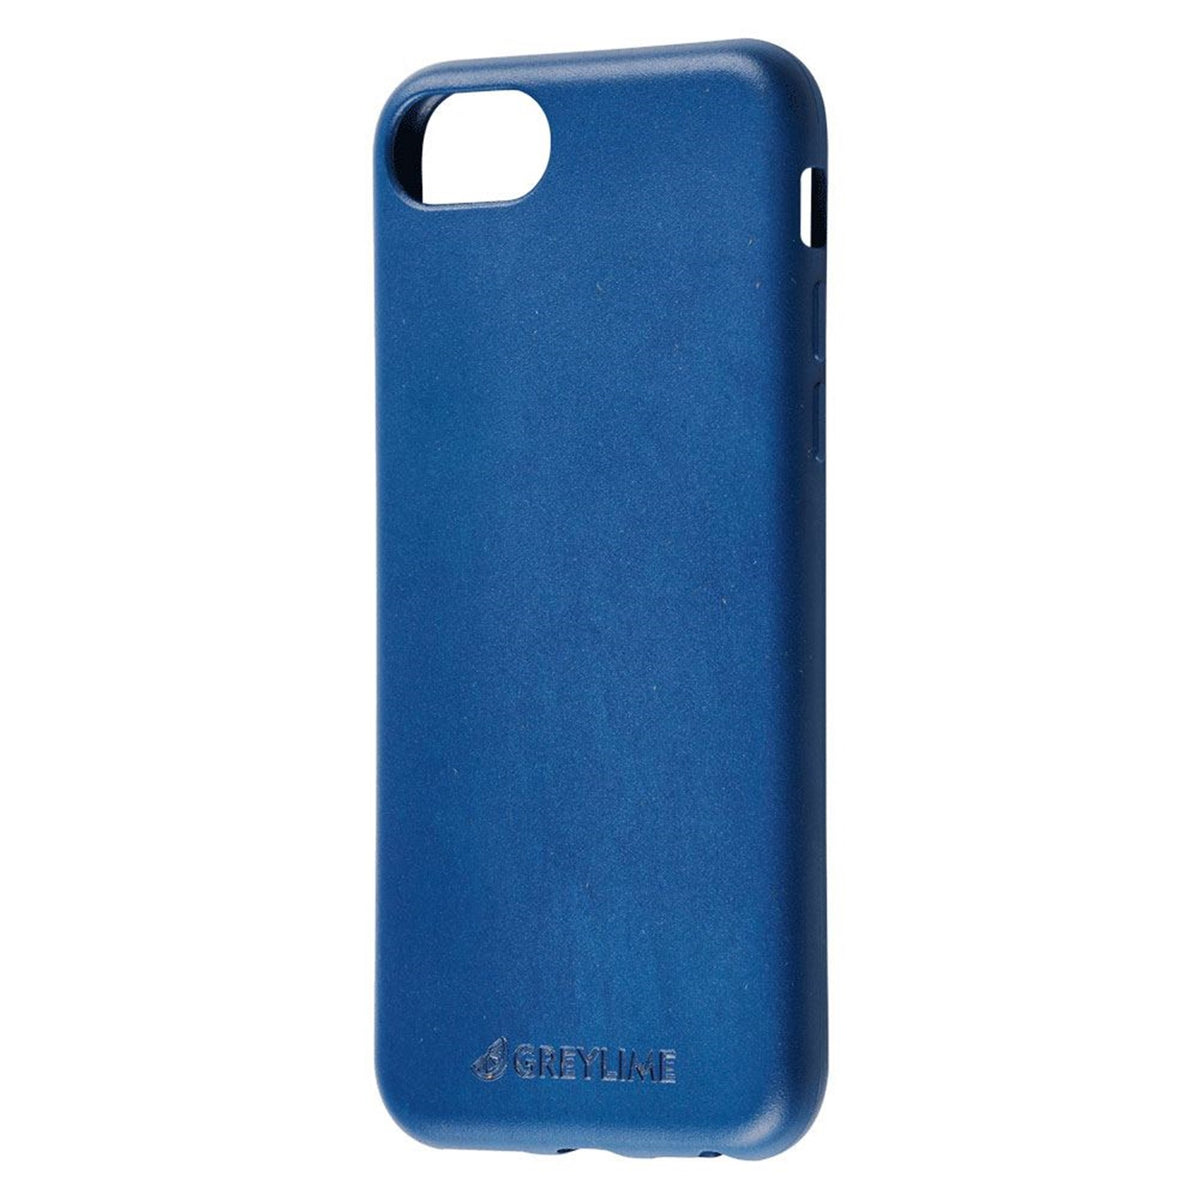 GreyLime-iPhone-6-7-8-Plus-biodegradable-cover-Navy-blue-COIP678P03-V2.jpg